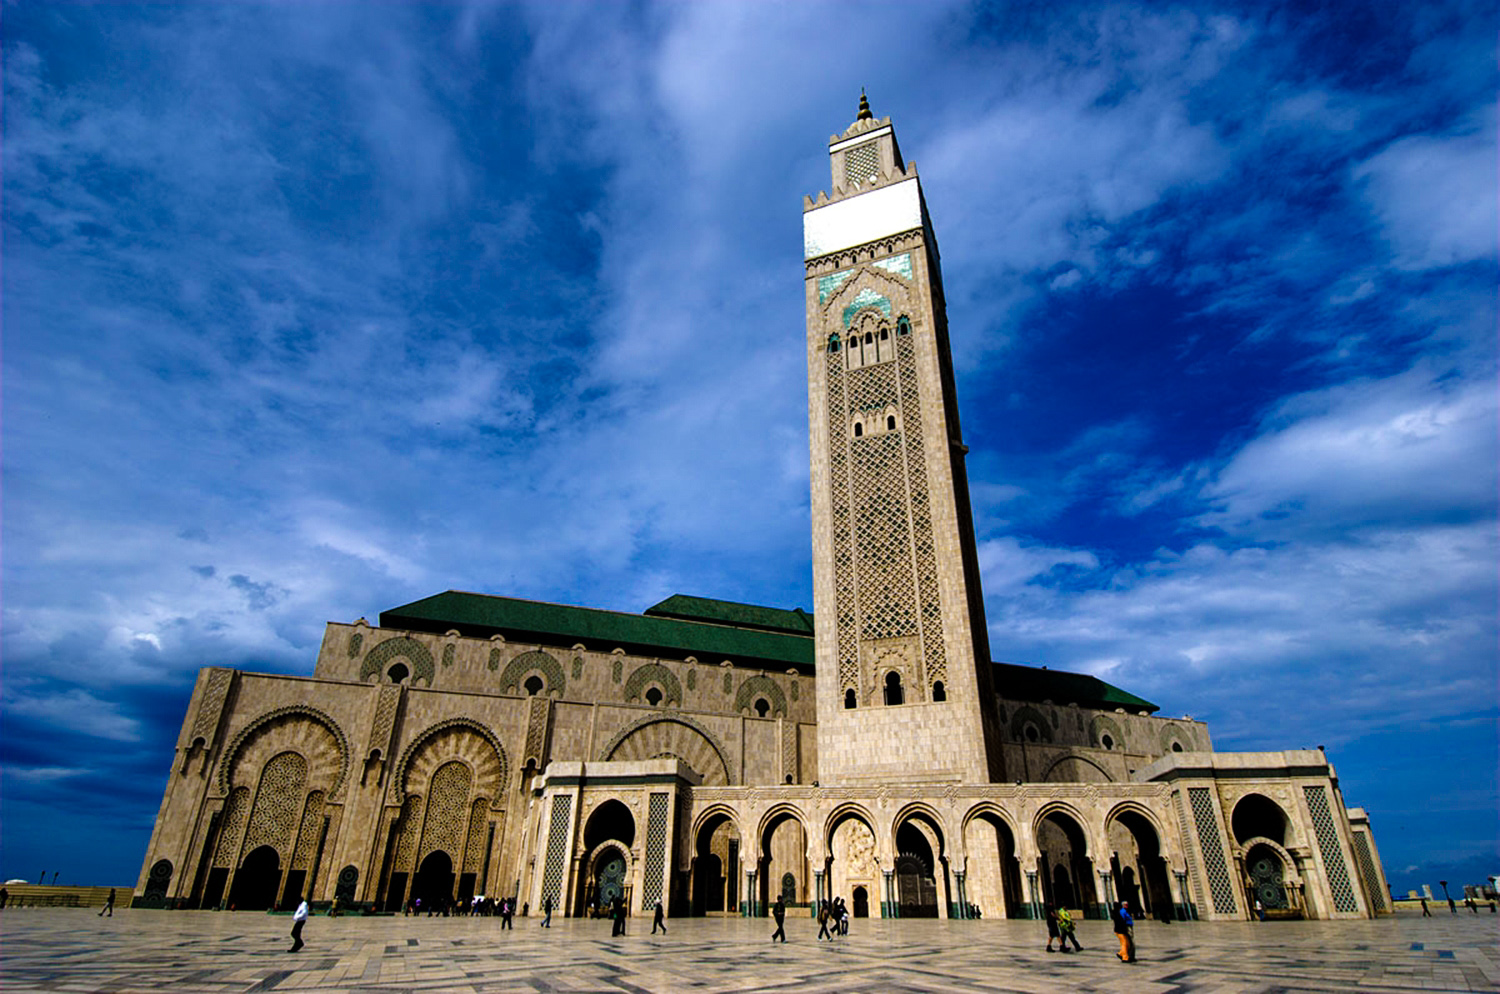 Morocco Imperial Cities & Desert Tour from Casablanca-11 Days